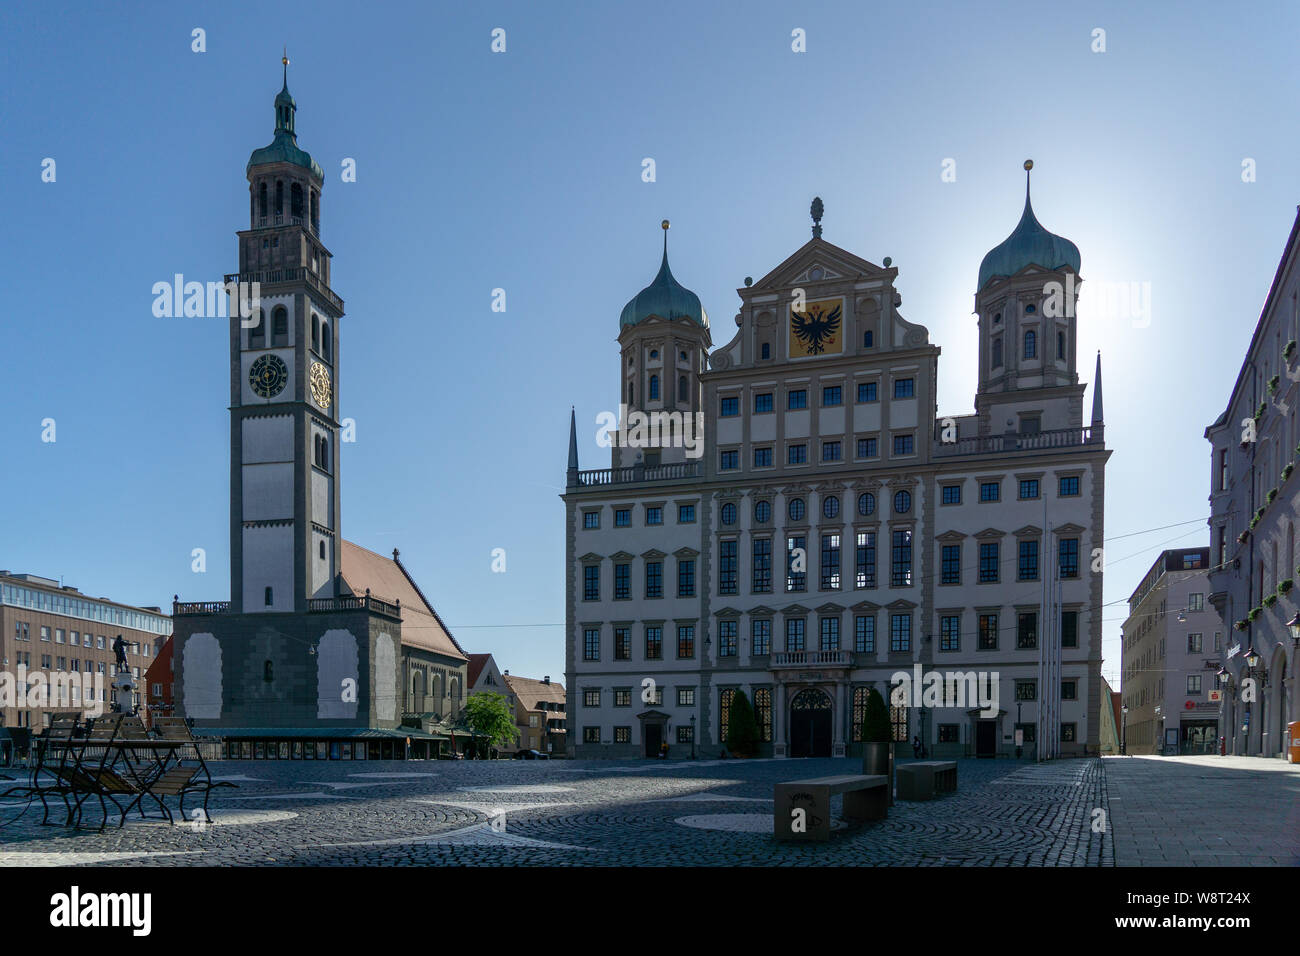 Augsburg town hall and perlach tower, unesco world heritage site Stock Photo